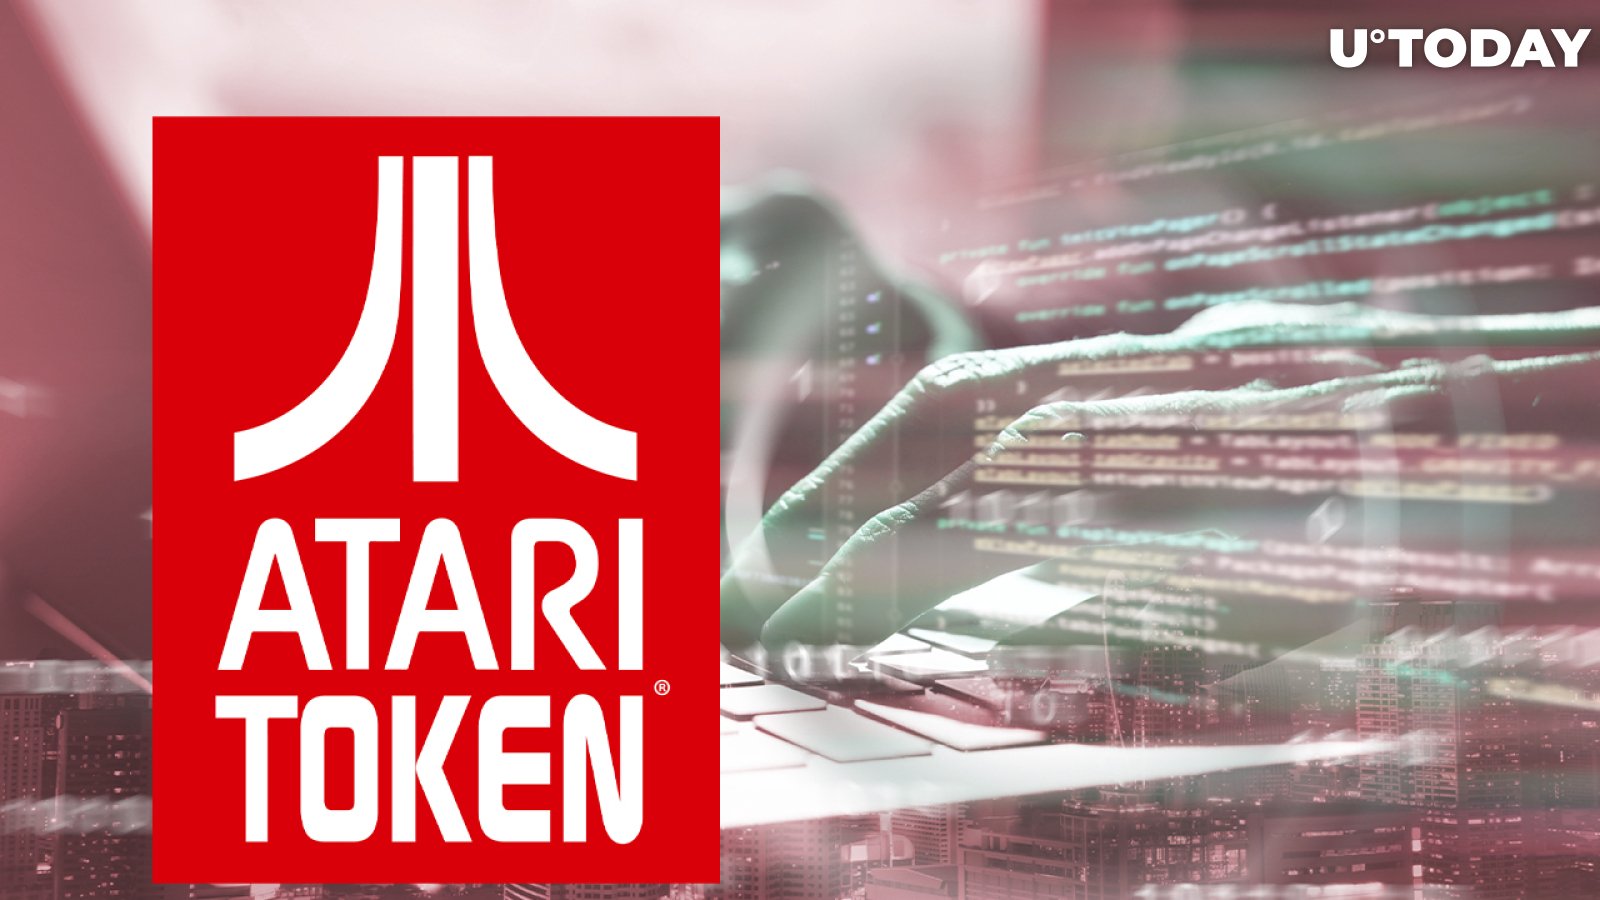 Atari Token Tanks as Video Game Developer Distances Itself from Cryptocurrency